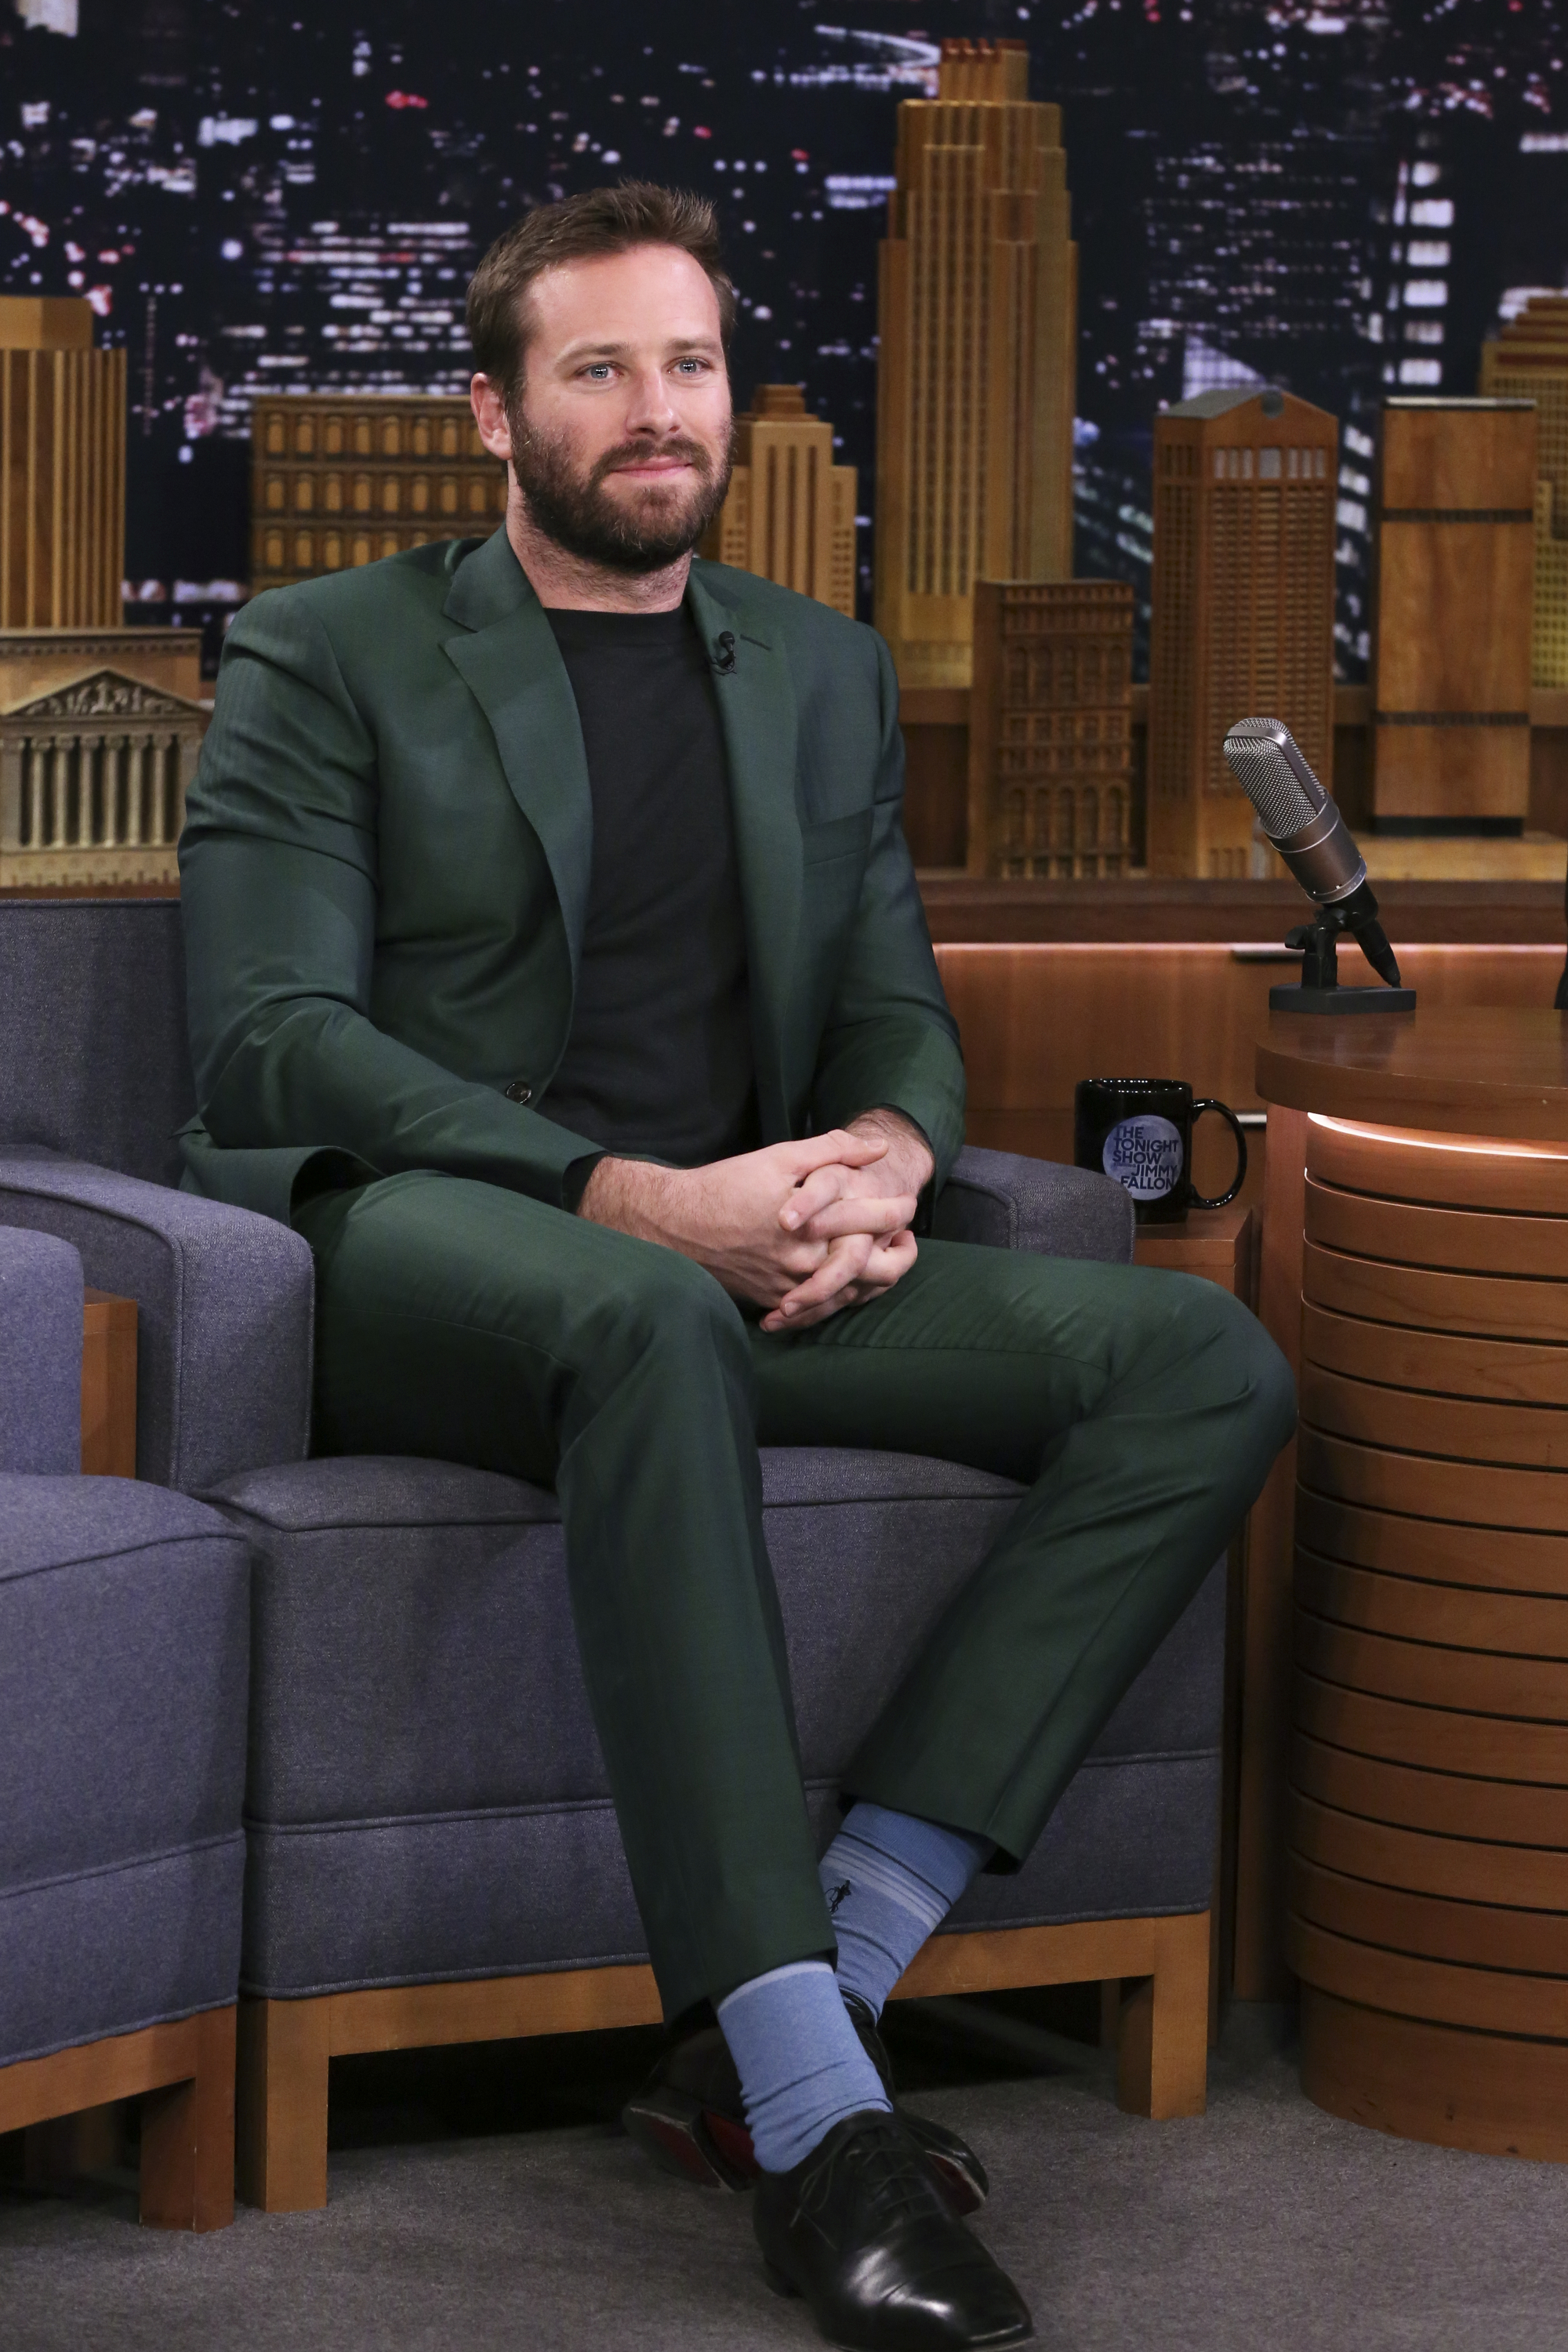 Actor Armie Hammer during a taping of The Tonight Show Starring Jimmy Fallon on March 20, 2019.